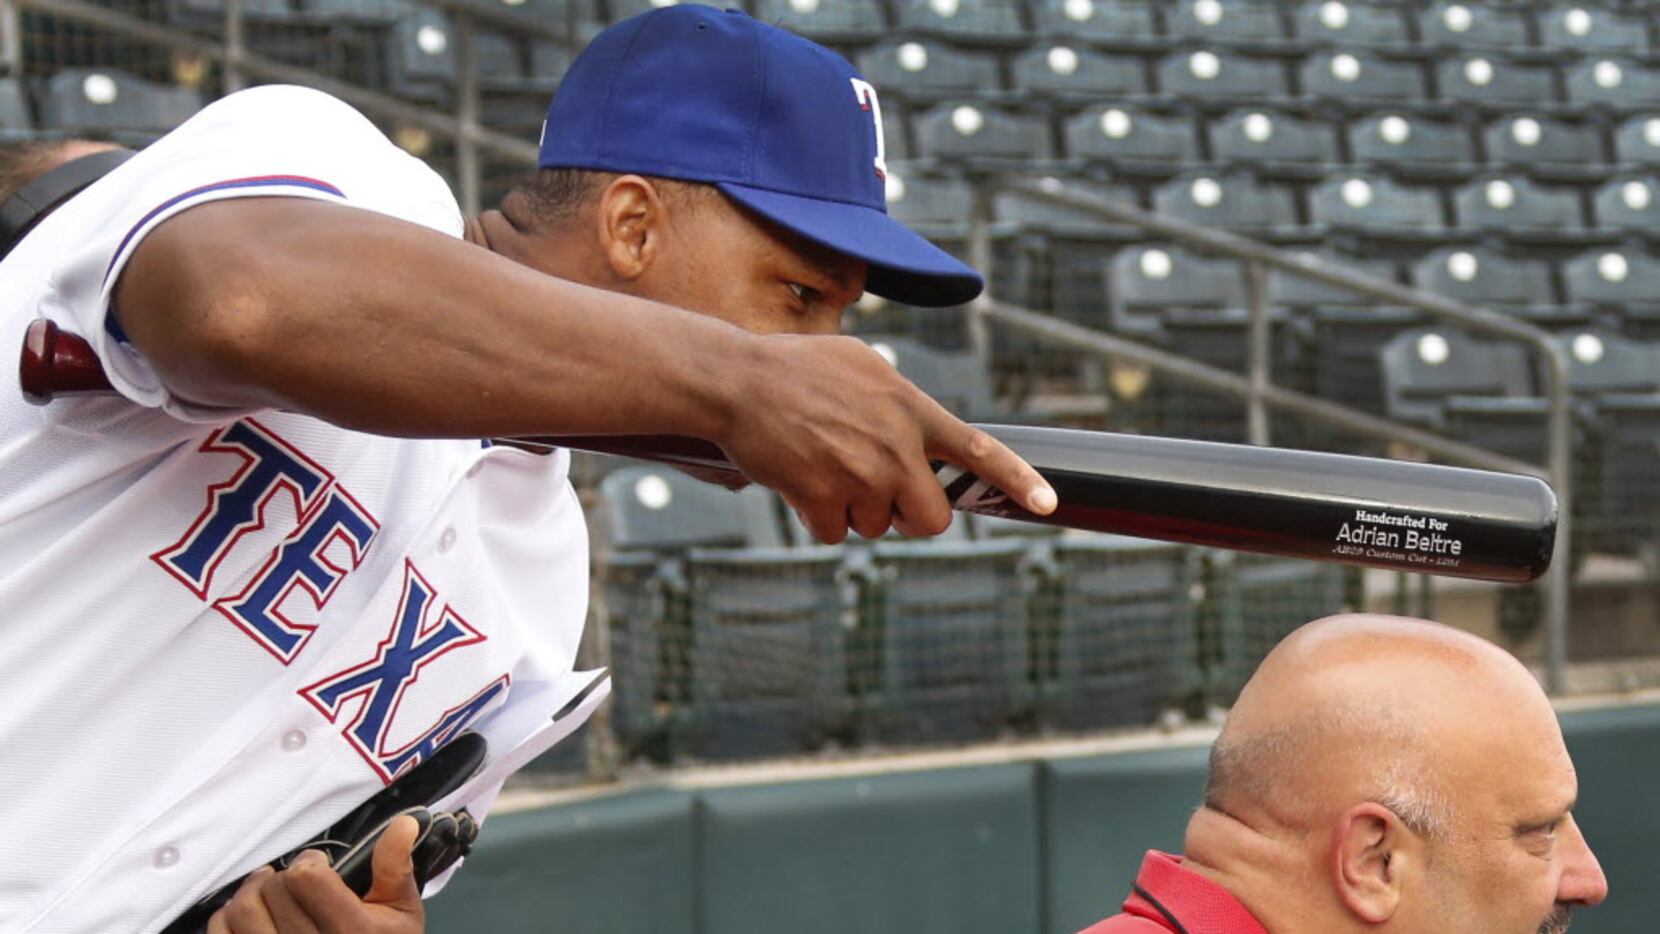 Adrian Beltre retires: Rangers, MLB less fun without him - Sports